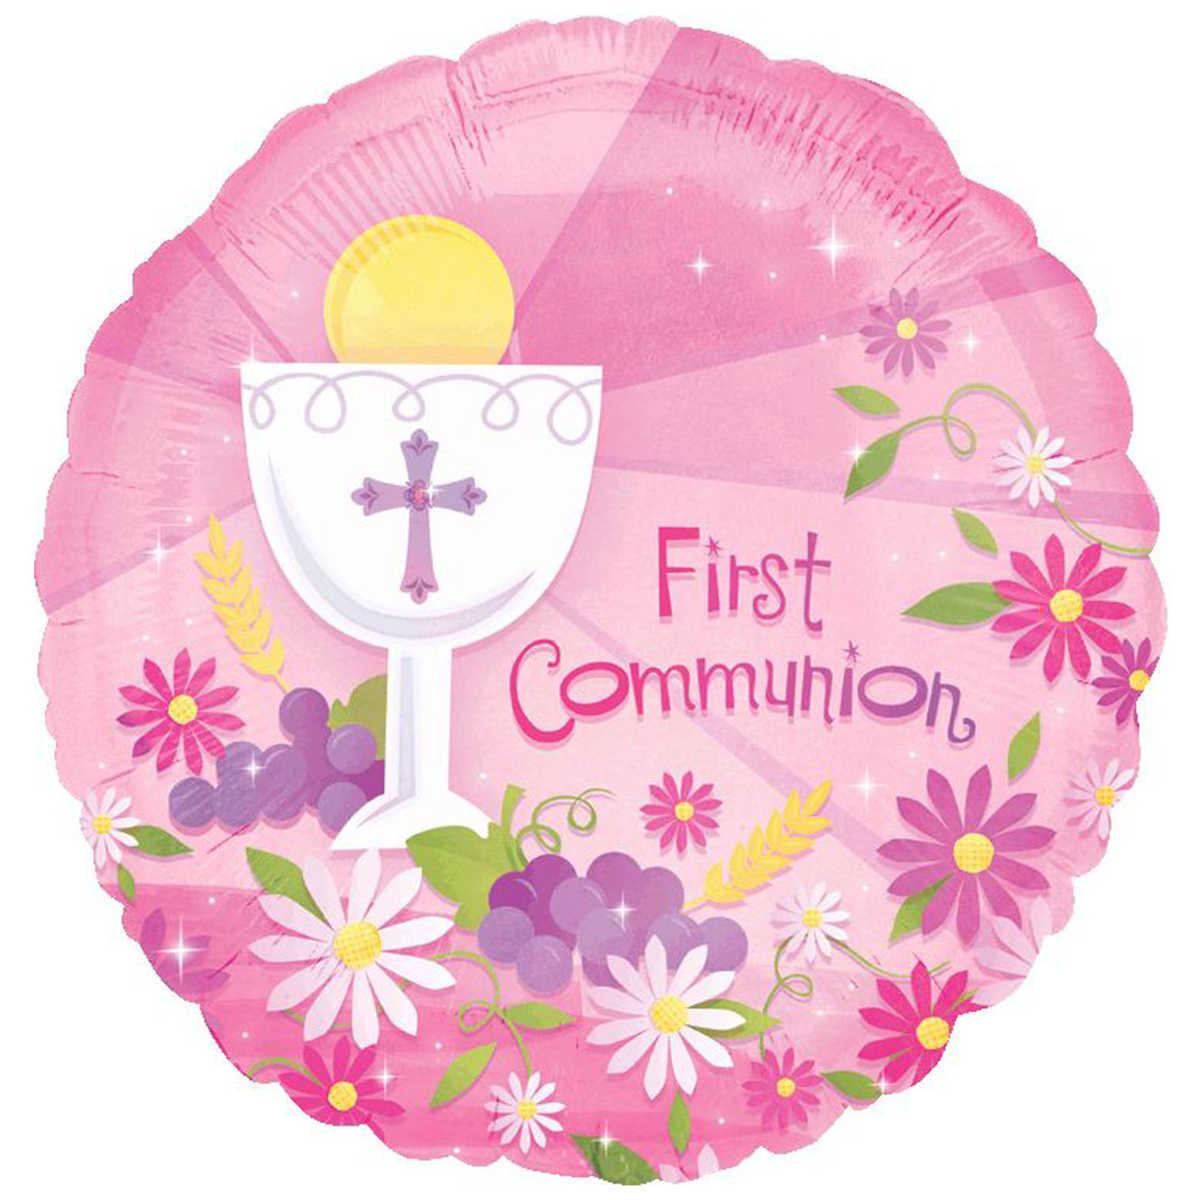 First Communion Pink Foil Balloon 18in Balloons & Streamers - Party Centre